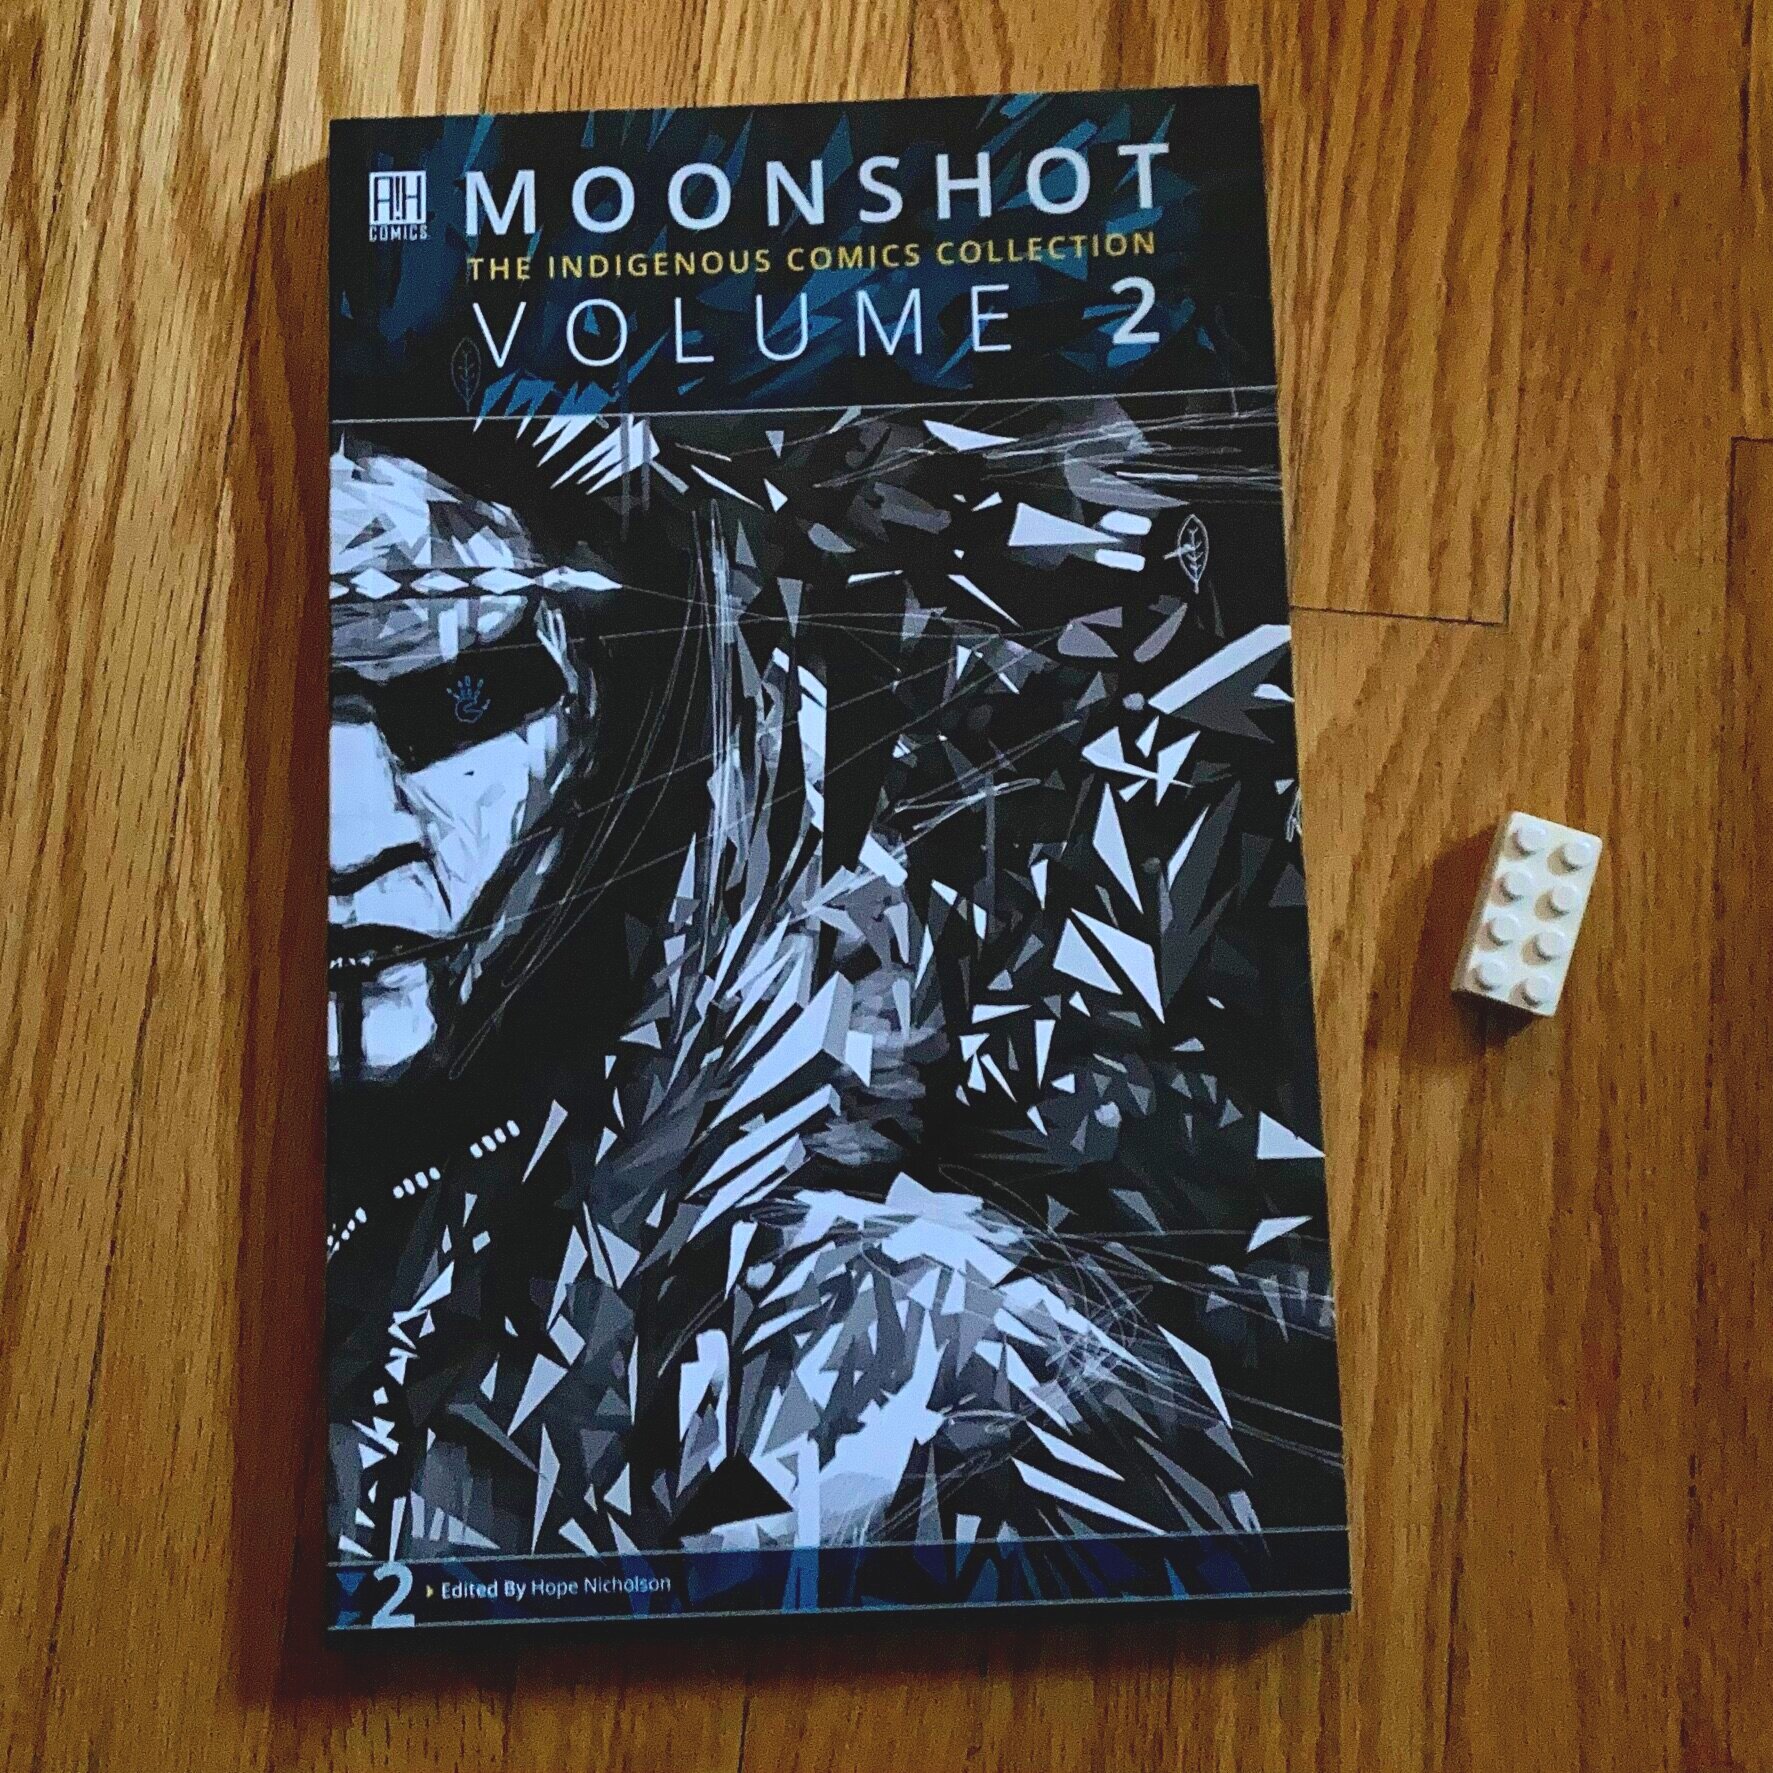 The cover of Moonshot, Volume 2